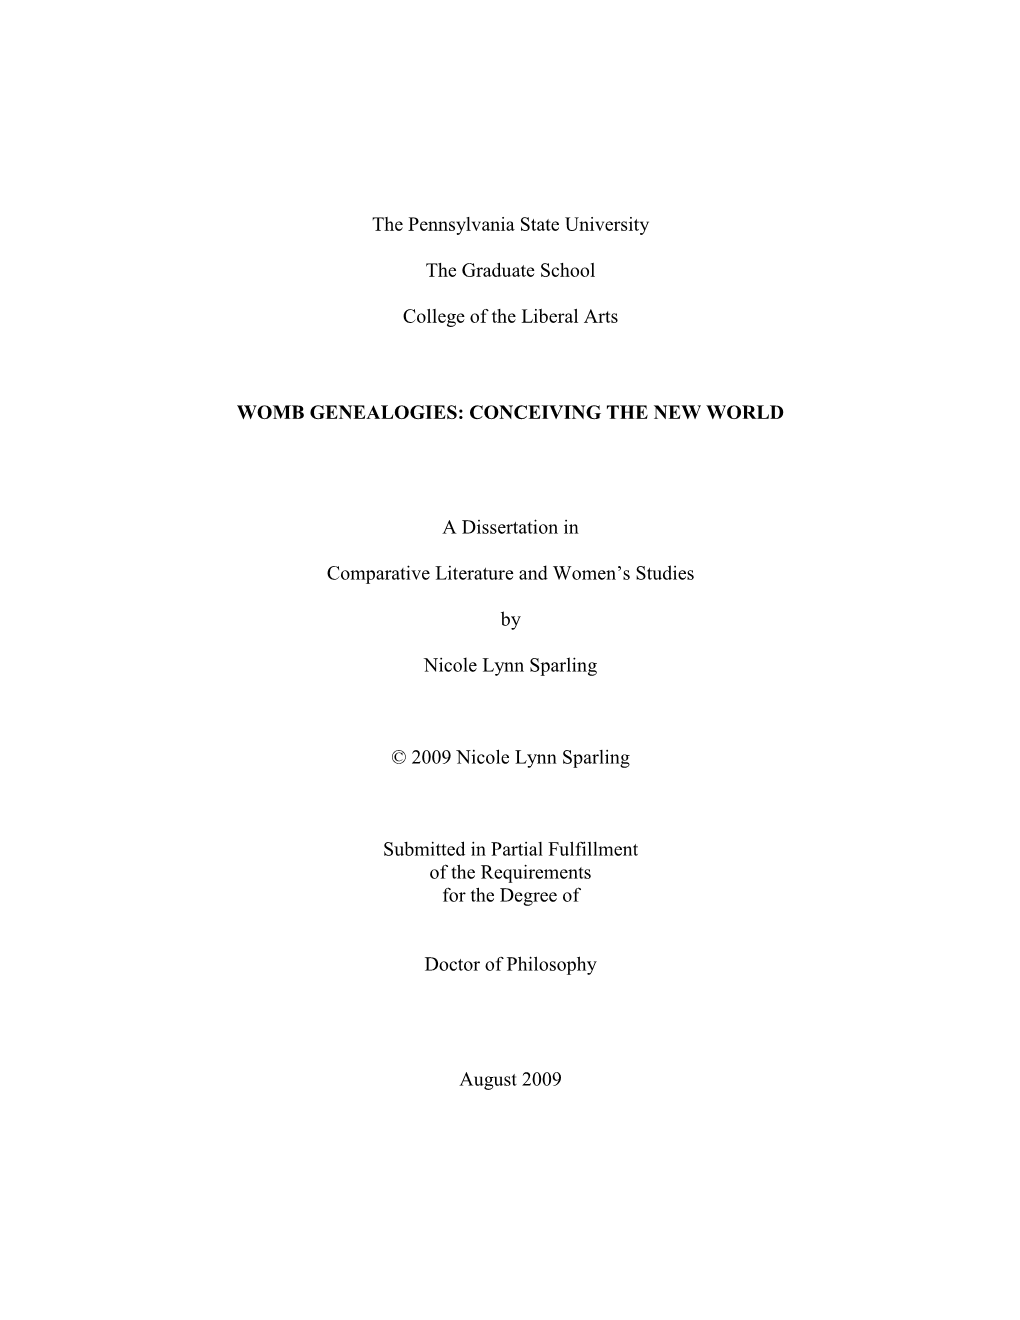 Open Nicole Sparling - Complete Dissertation File.Pdf